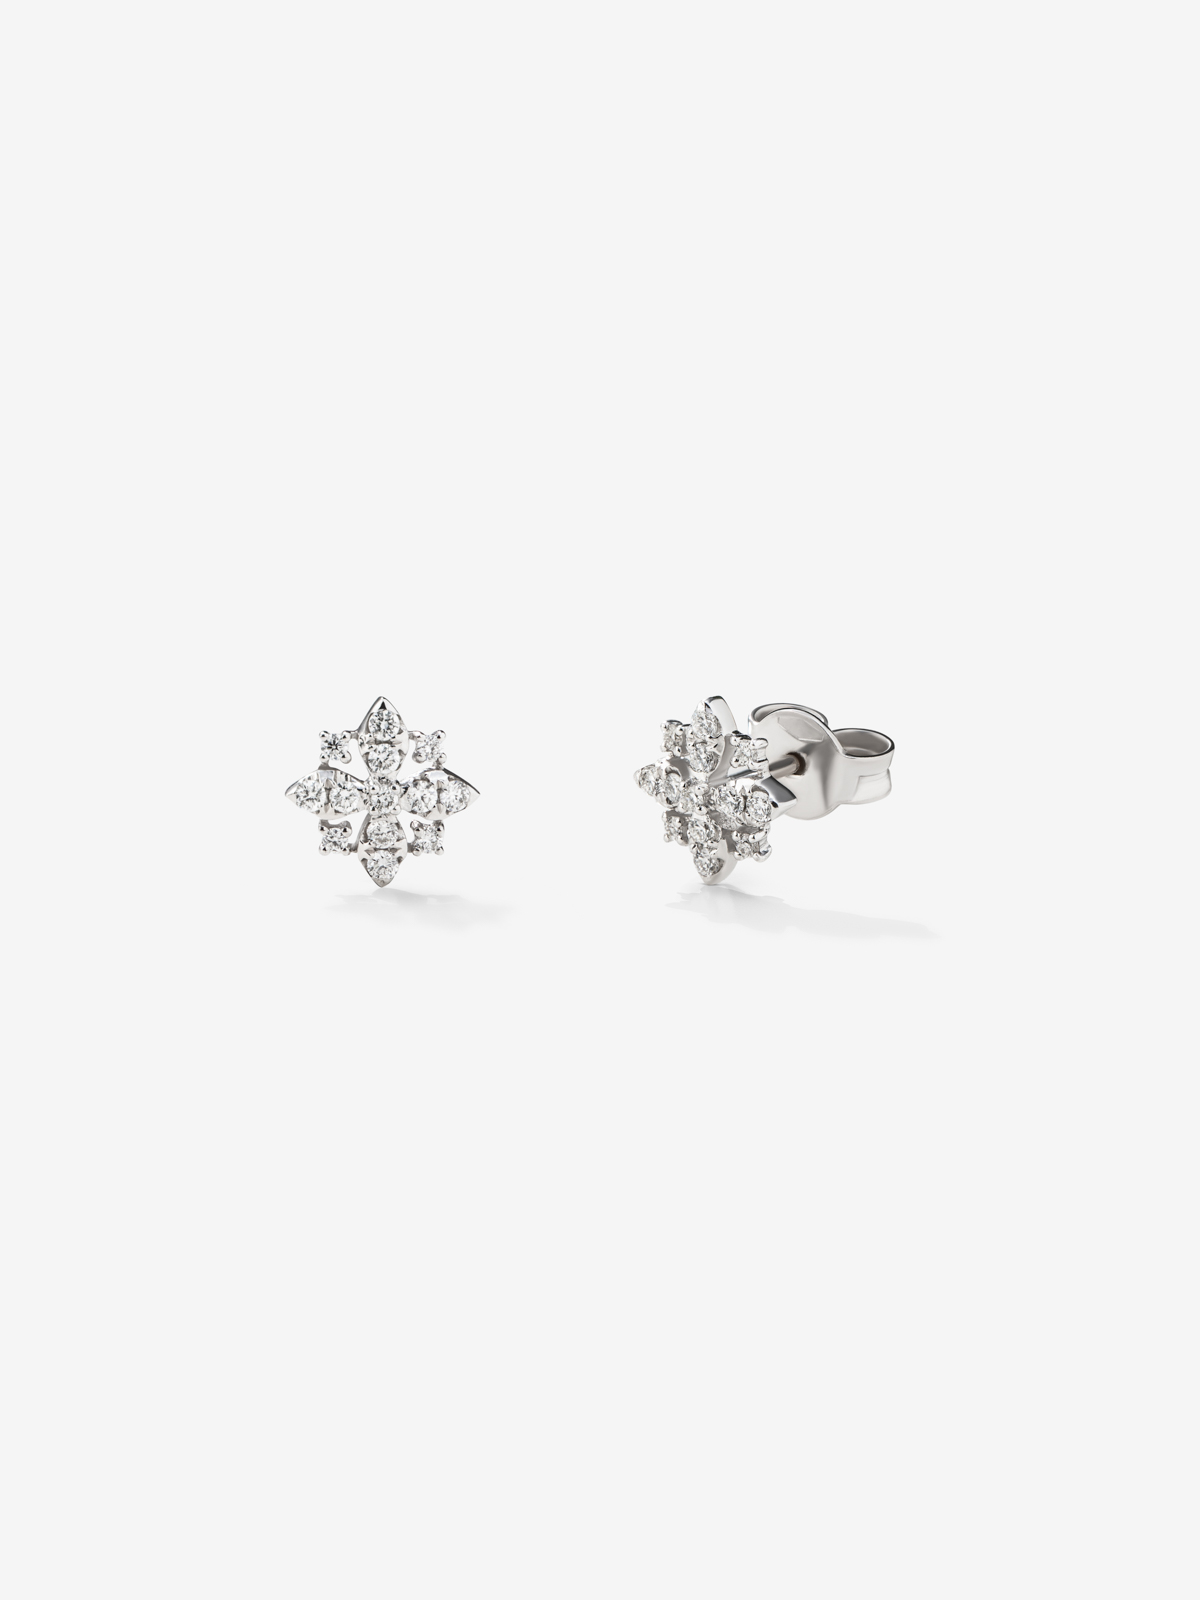 18K White Gold Earrings with Pave Diamonds